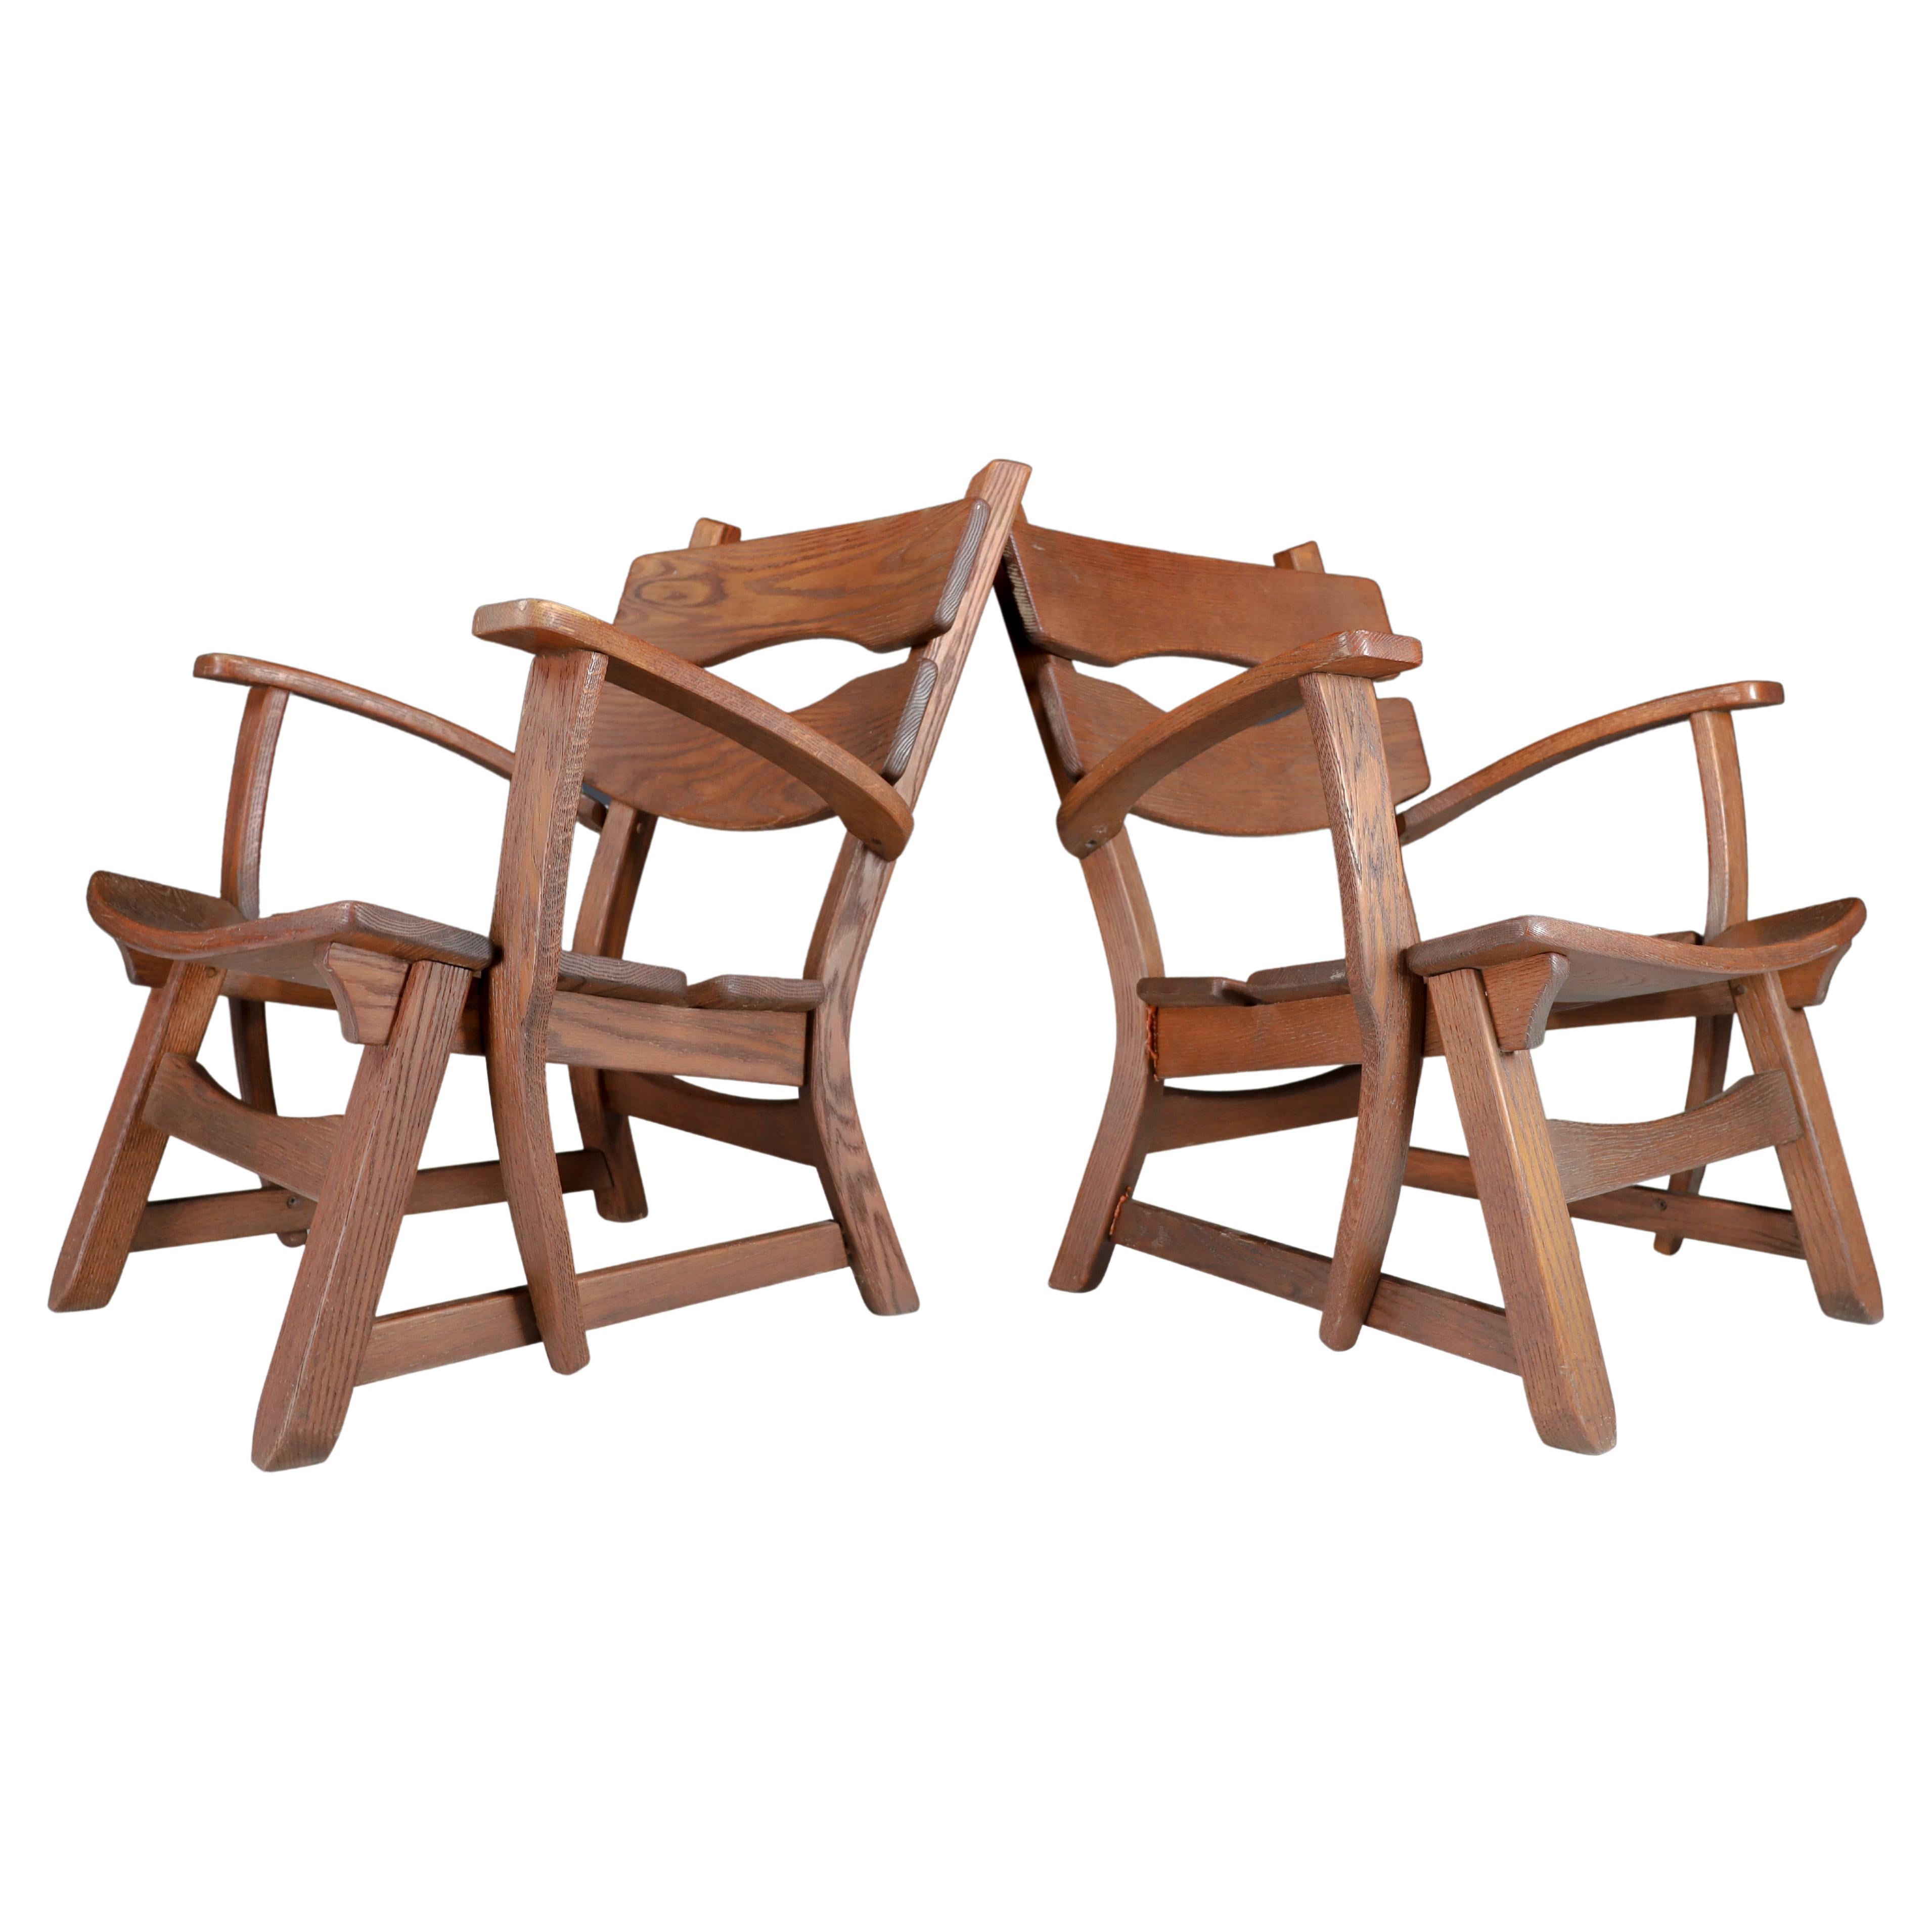 Sculptural Oak Armchairs Manufactured and Designed in France, 1960s